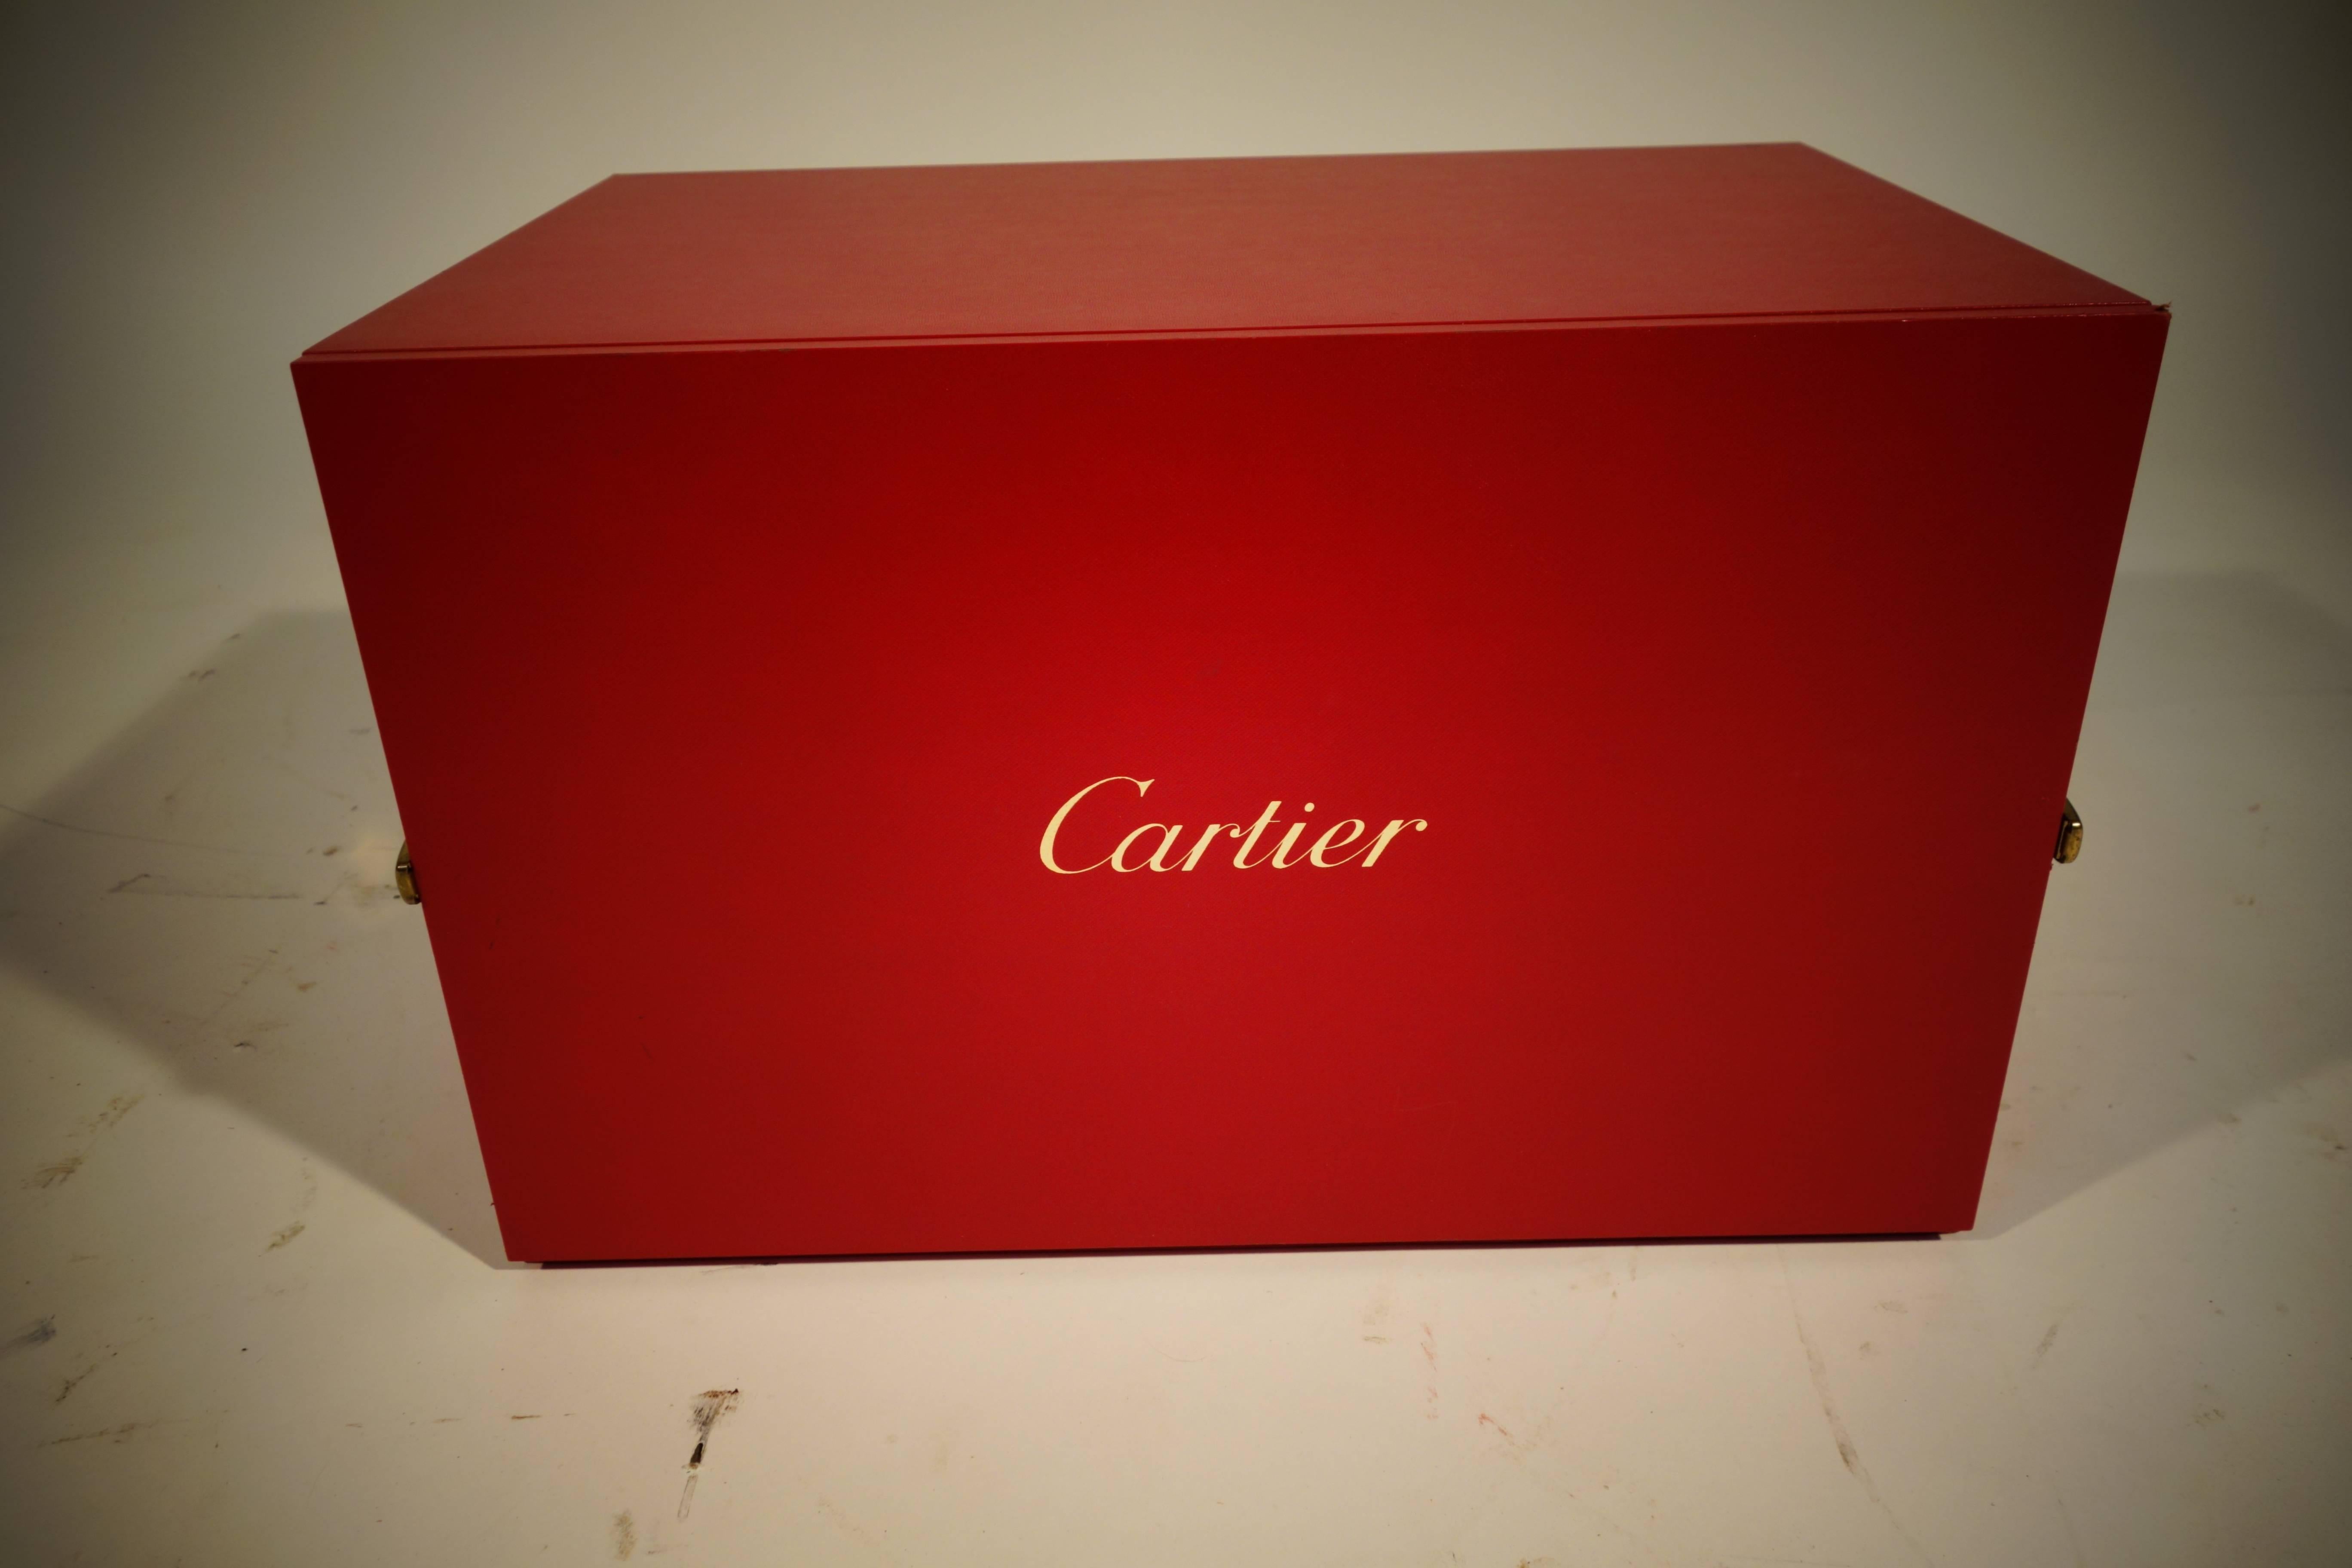 French 1980s Cartier Watch Box for Accessories